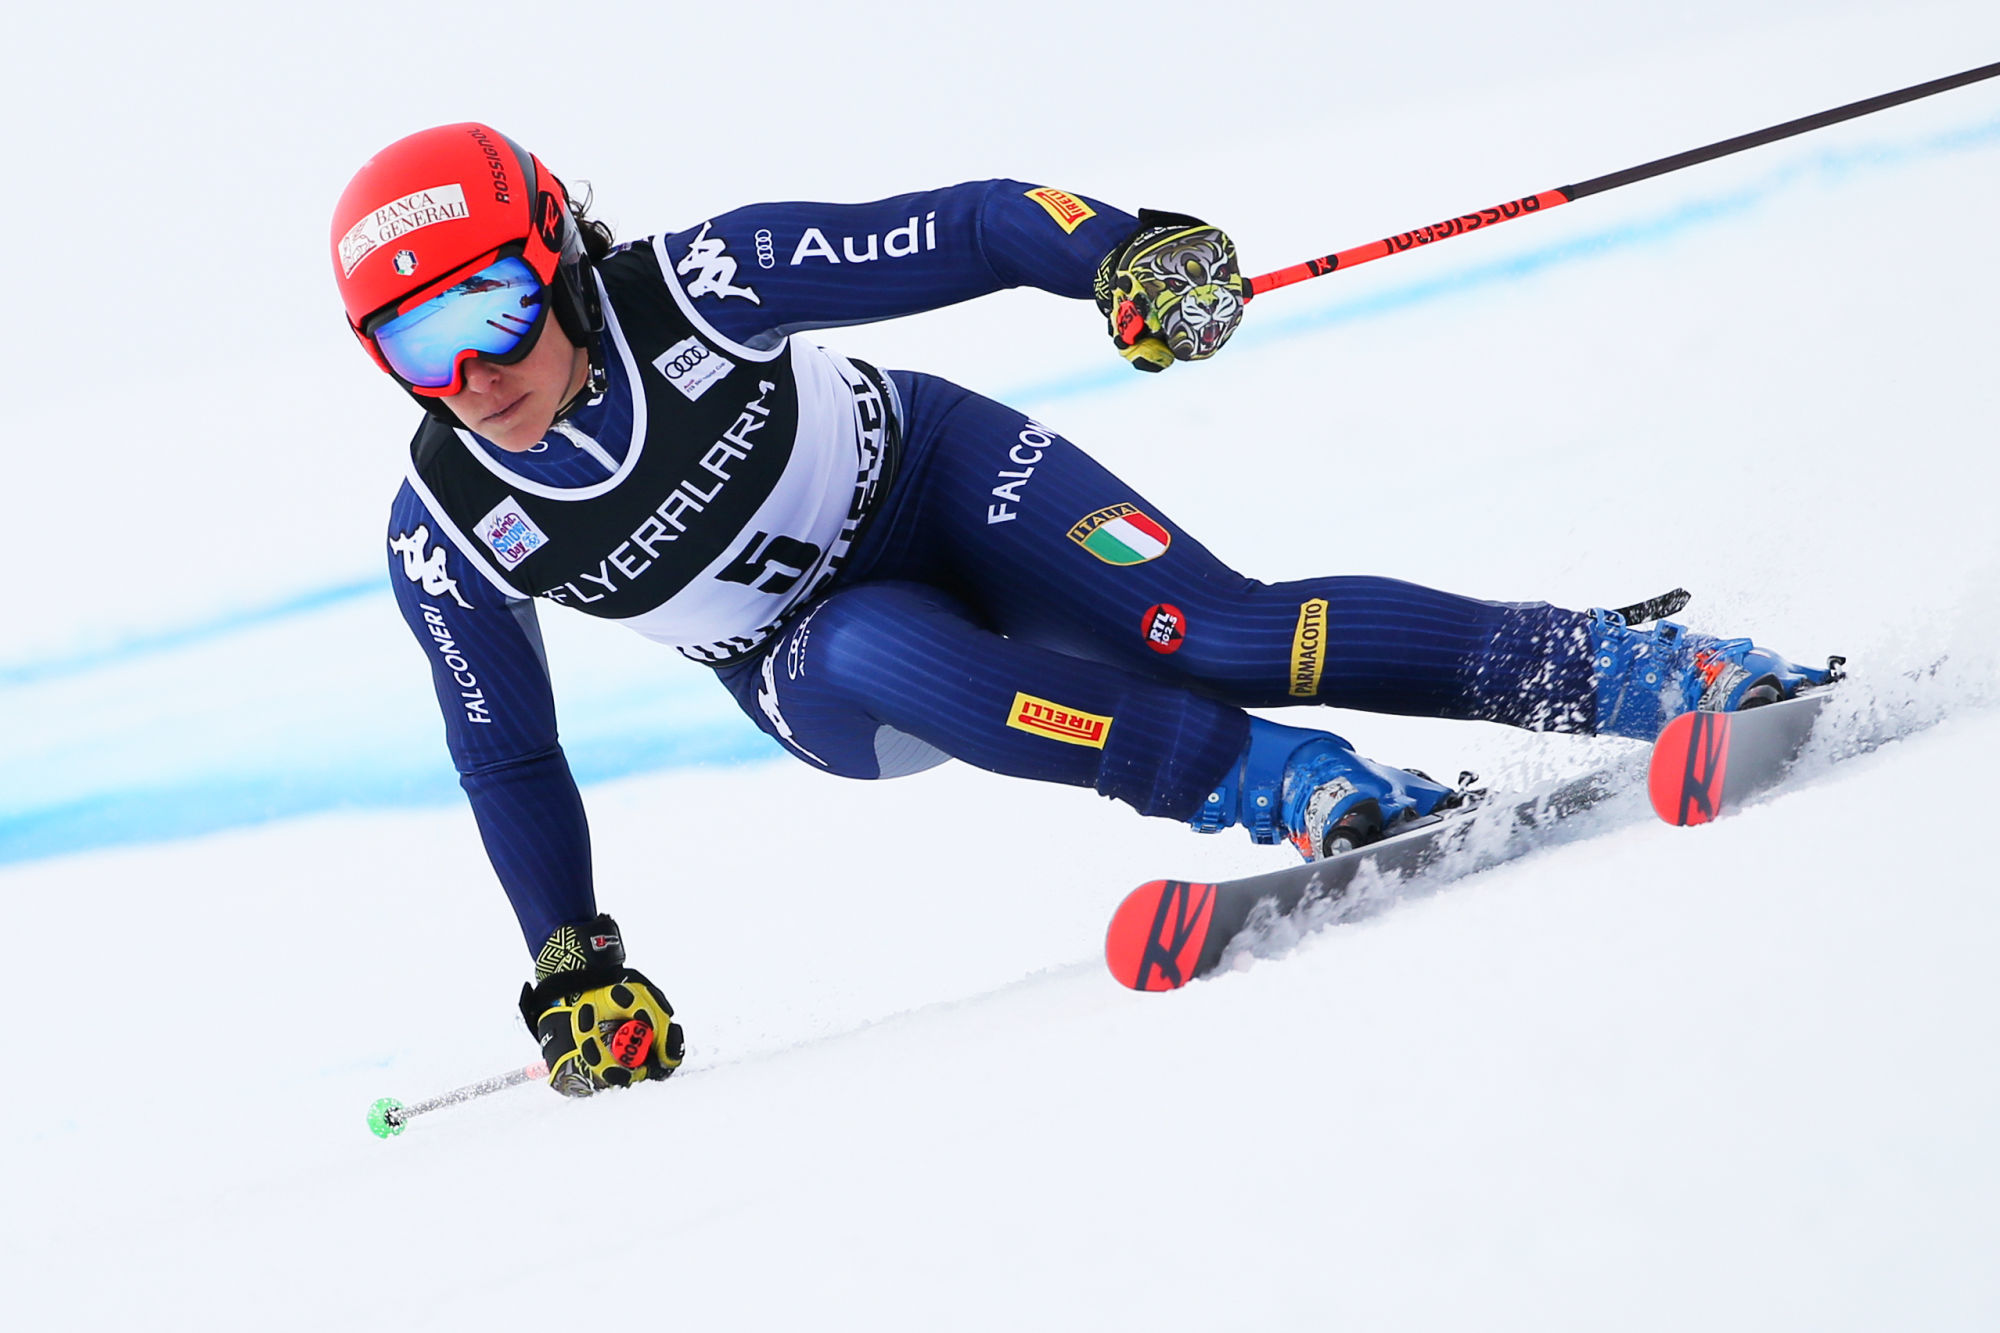 COURCHEVEL,FRANCE,17.DEC.19 - ALPINE SKIING - FIS World Cup, giant slalom, ladies. Image shows Federica Brignone (ITA). Photo: GEPA pictures/ Mathias Mandl 

Photo by Icon Sport - Courchevel (France)